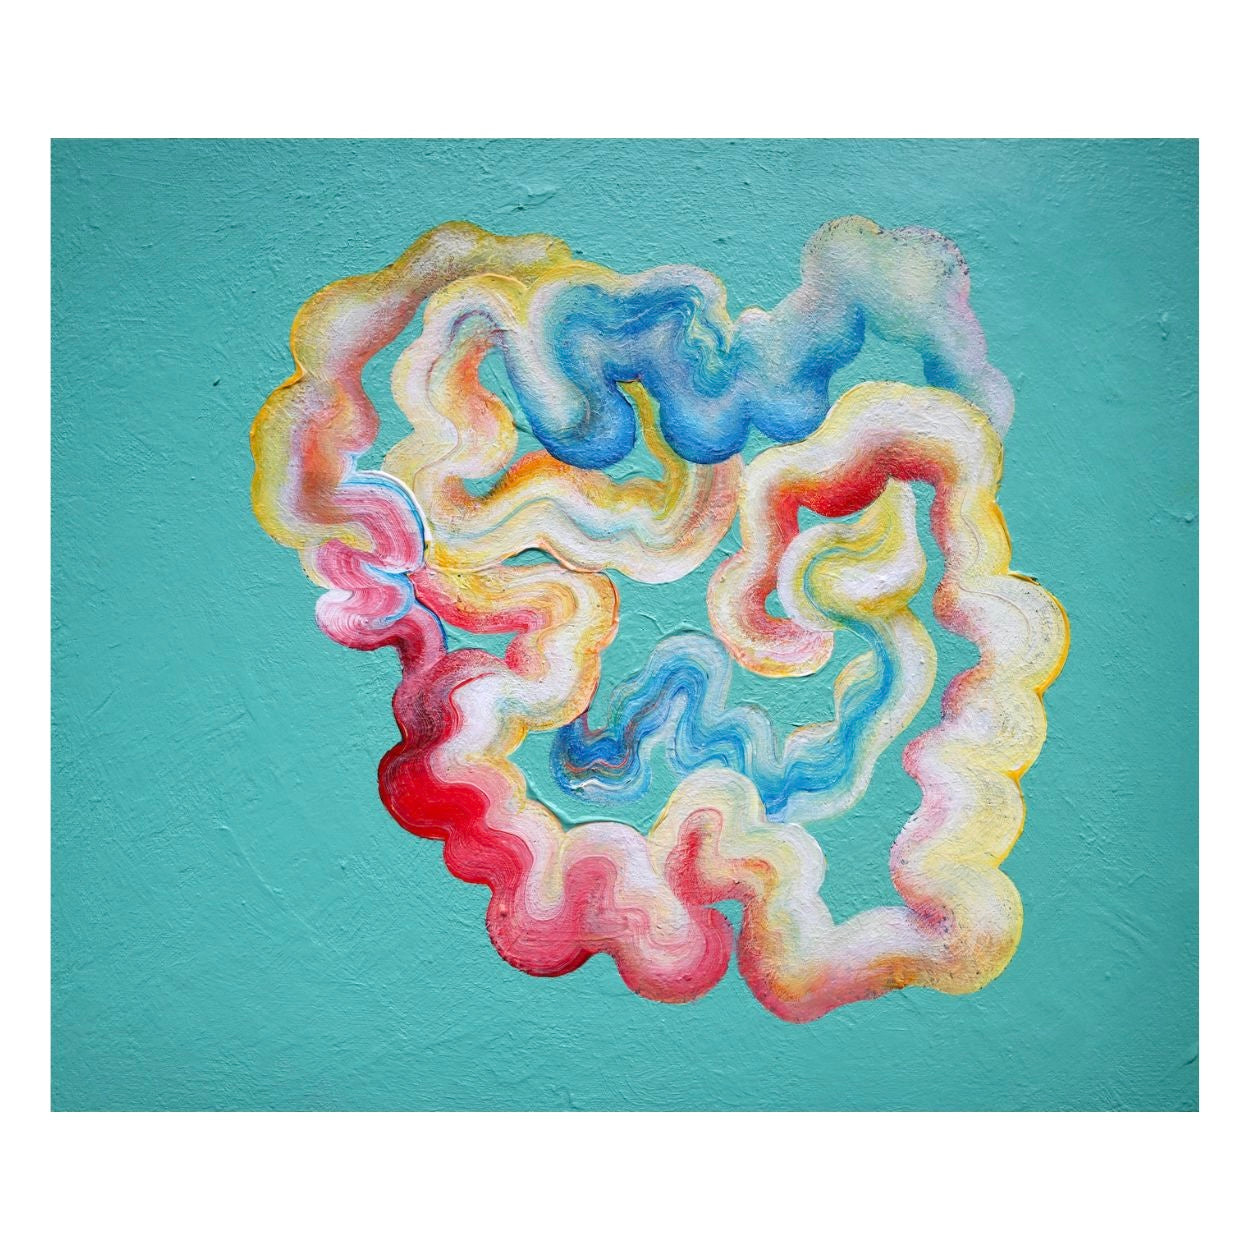 Unique and playful abstract painting 